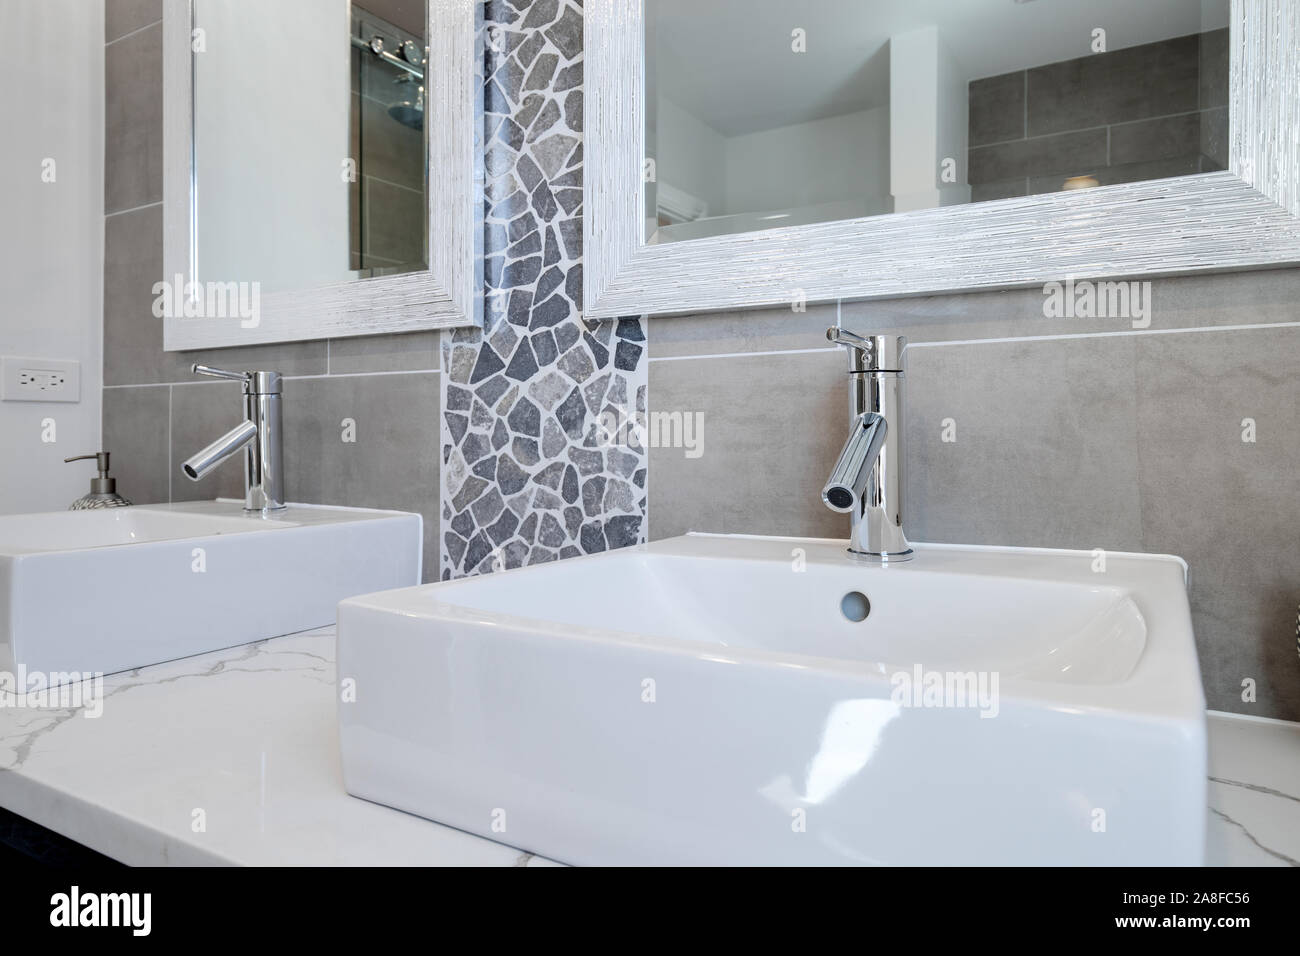 A fancy vessel sink with chrome hardware. A rock and marble back splash cover the wall with a framed mirror also hanging. Stock Photo